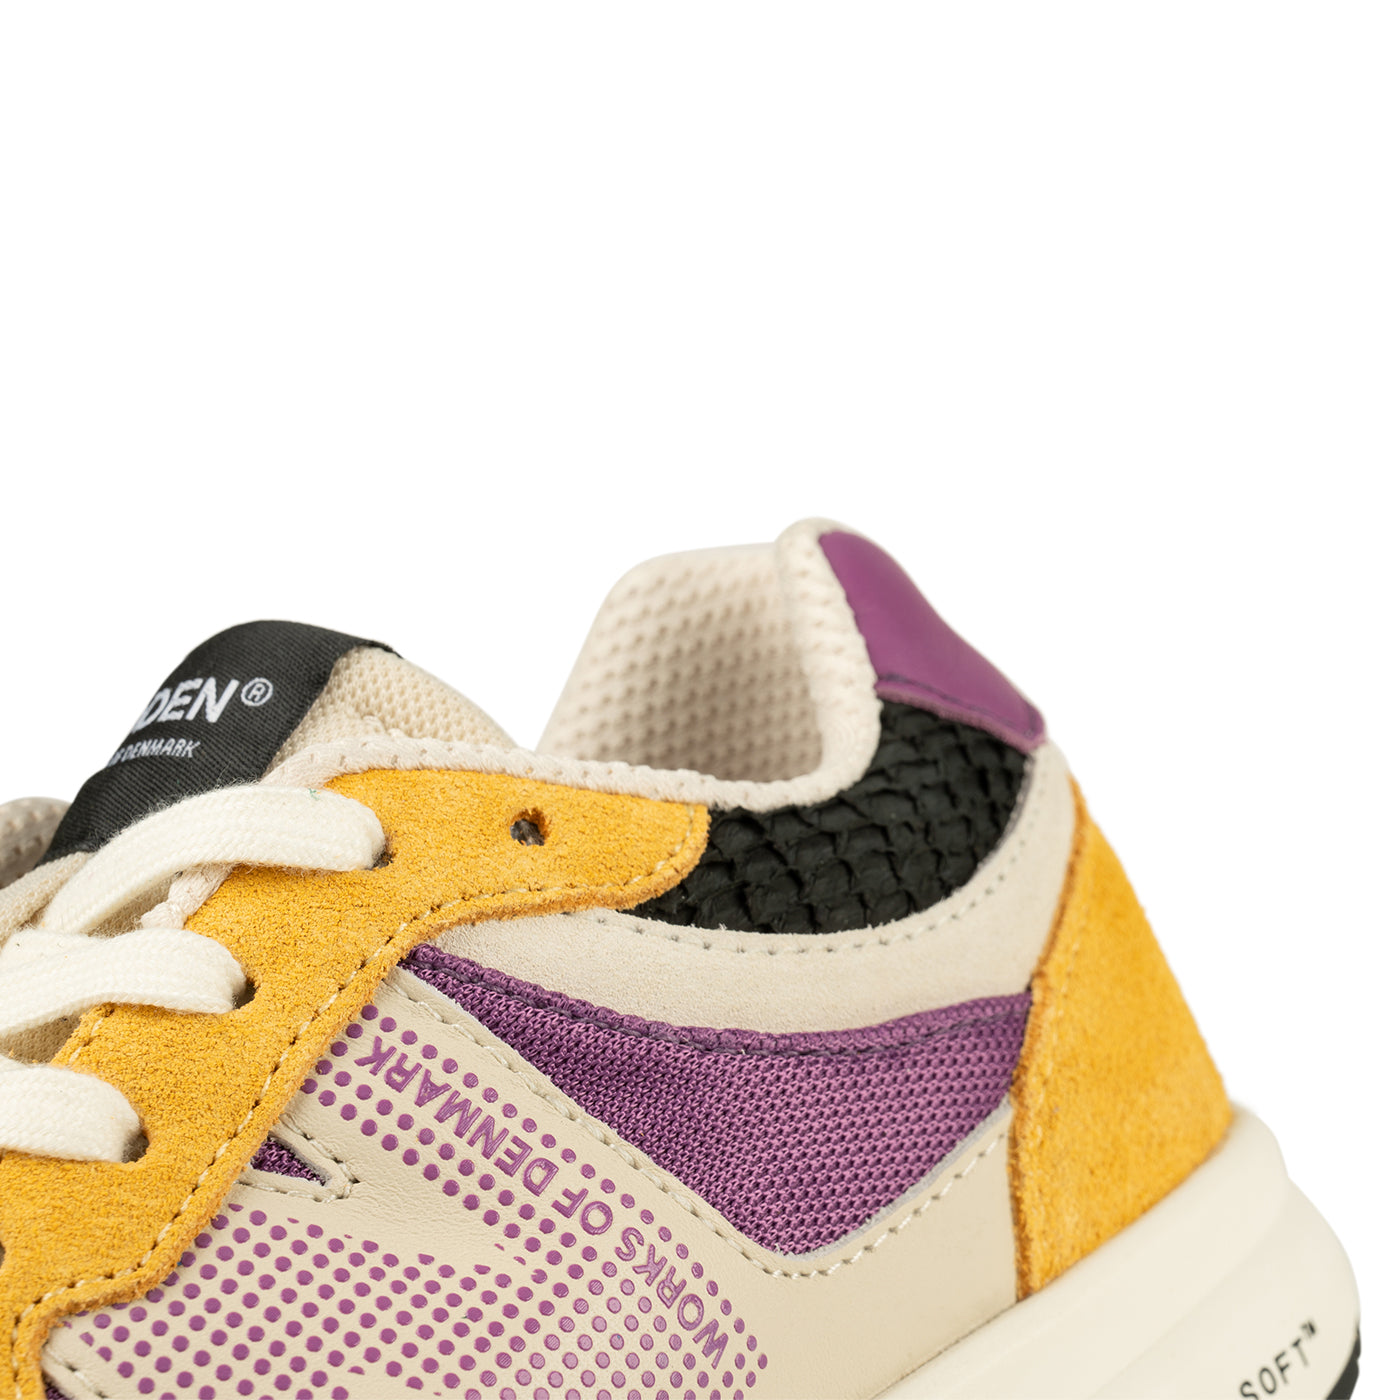 WODEN Rigmor Sneakers 108 Old Gold/Amethyst